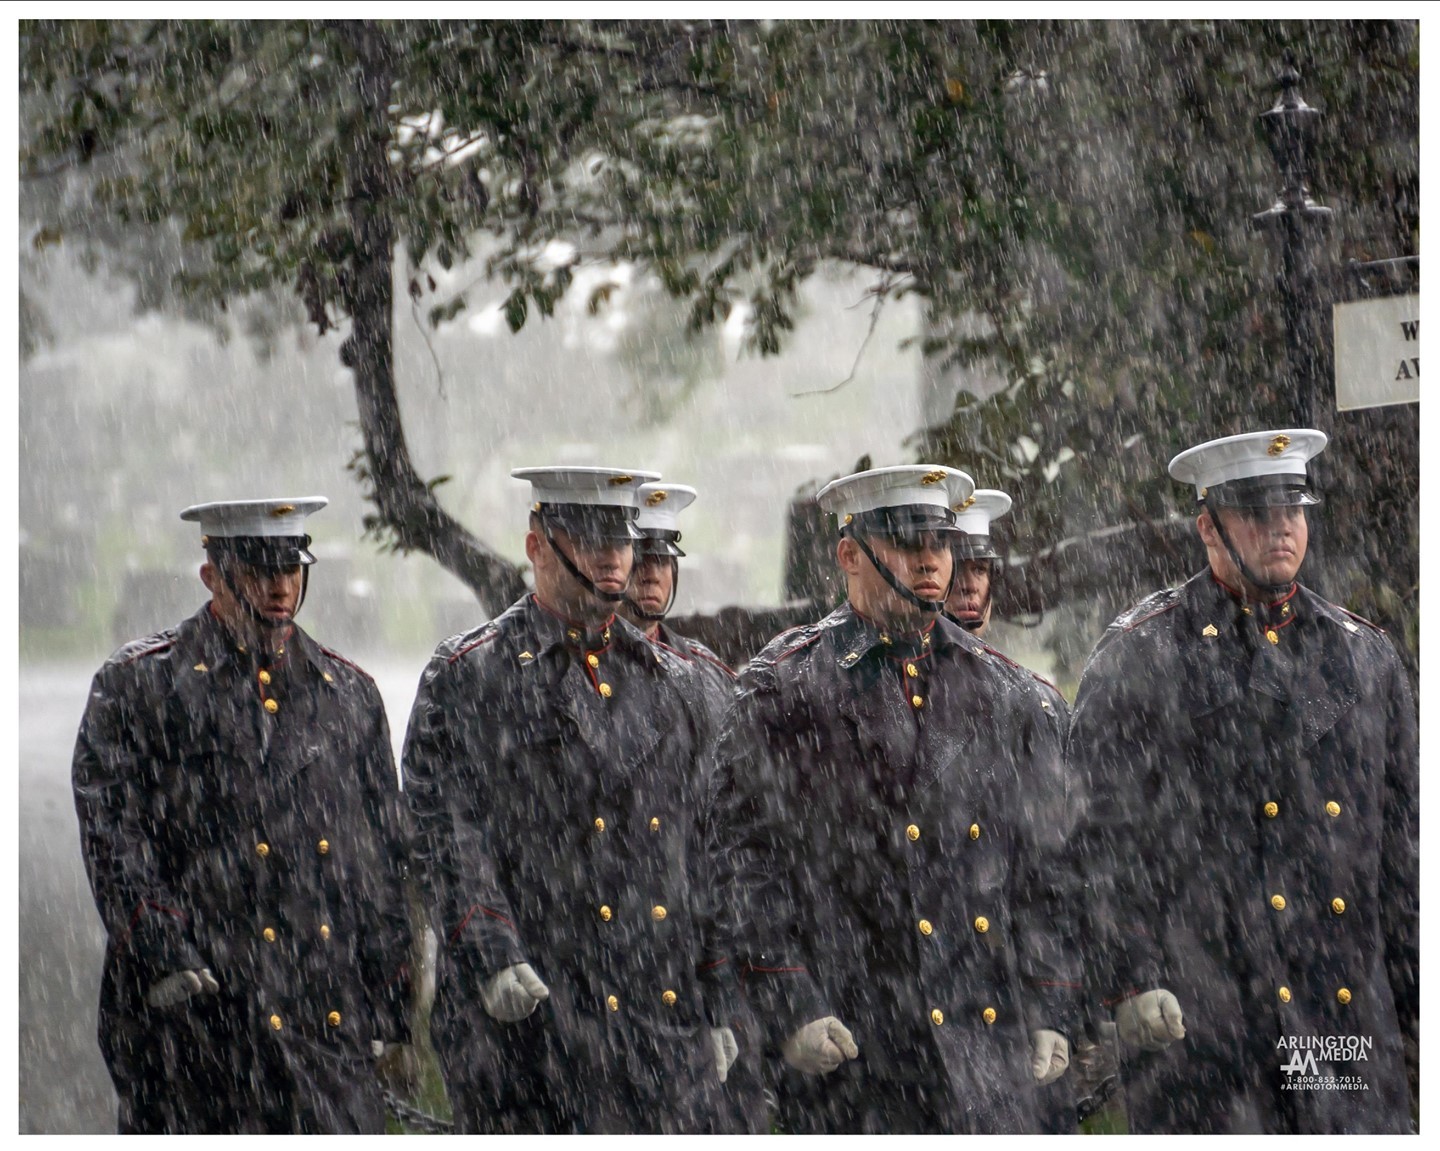 Our @arlingtonmedia team photographs services in all weather conditions and believe that if the military will be there no matter what to answer the call, we will do our best to be prepared as well.

We photographed this image during a service with flash flooding and torrential rain and felt privileged and honored to capture this photographs in memory of this family's loved one.

@marines
@marinebarrackswashington